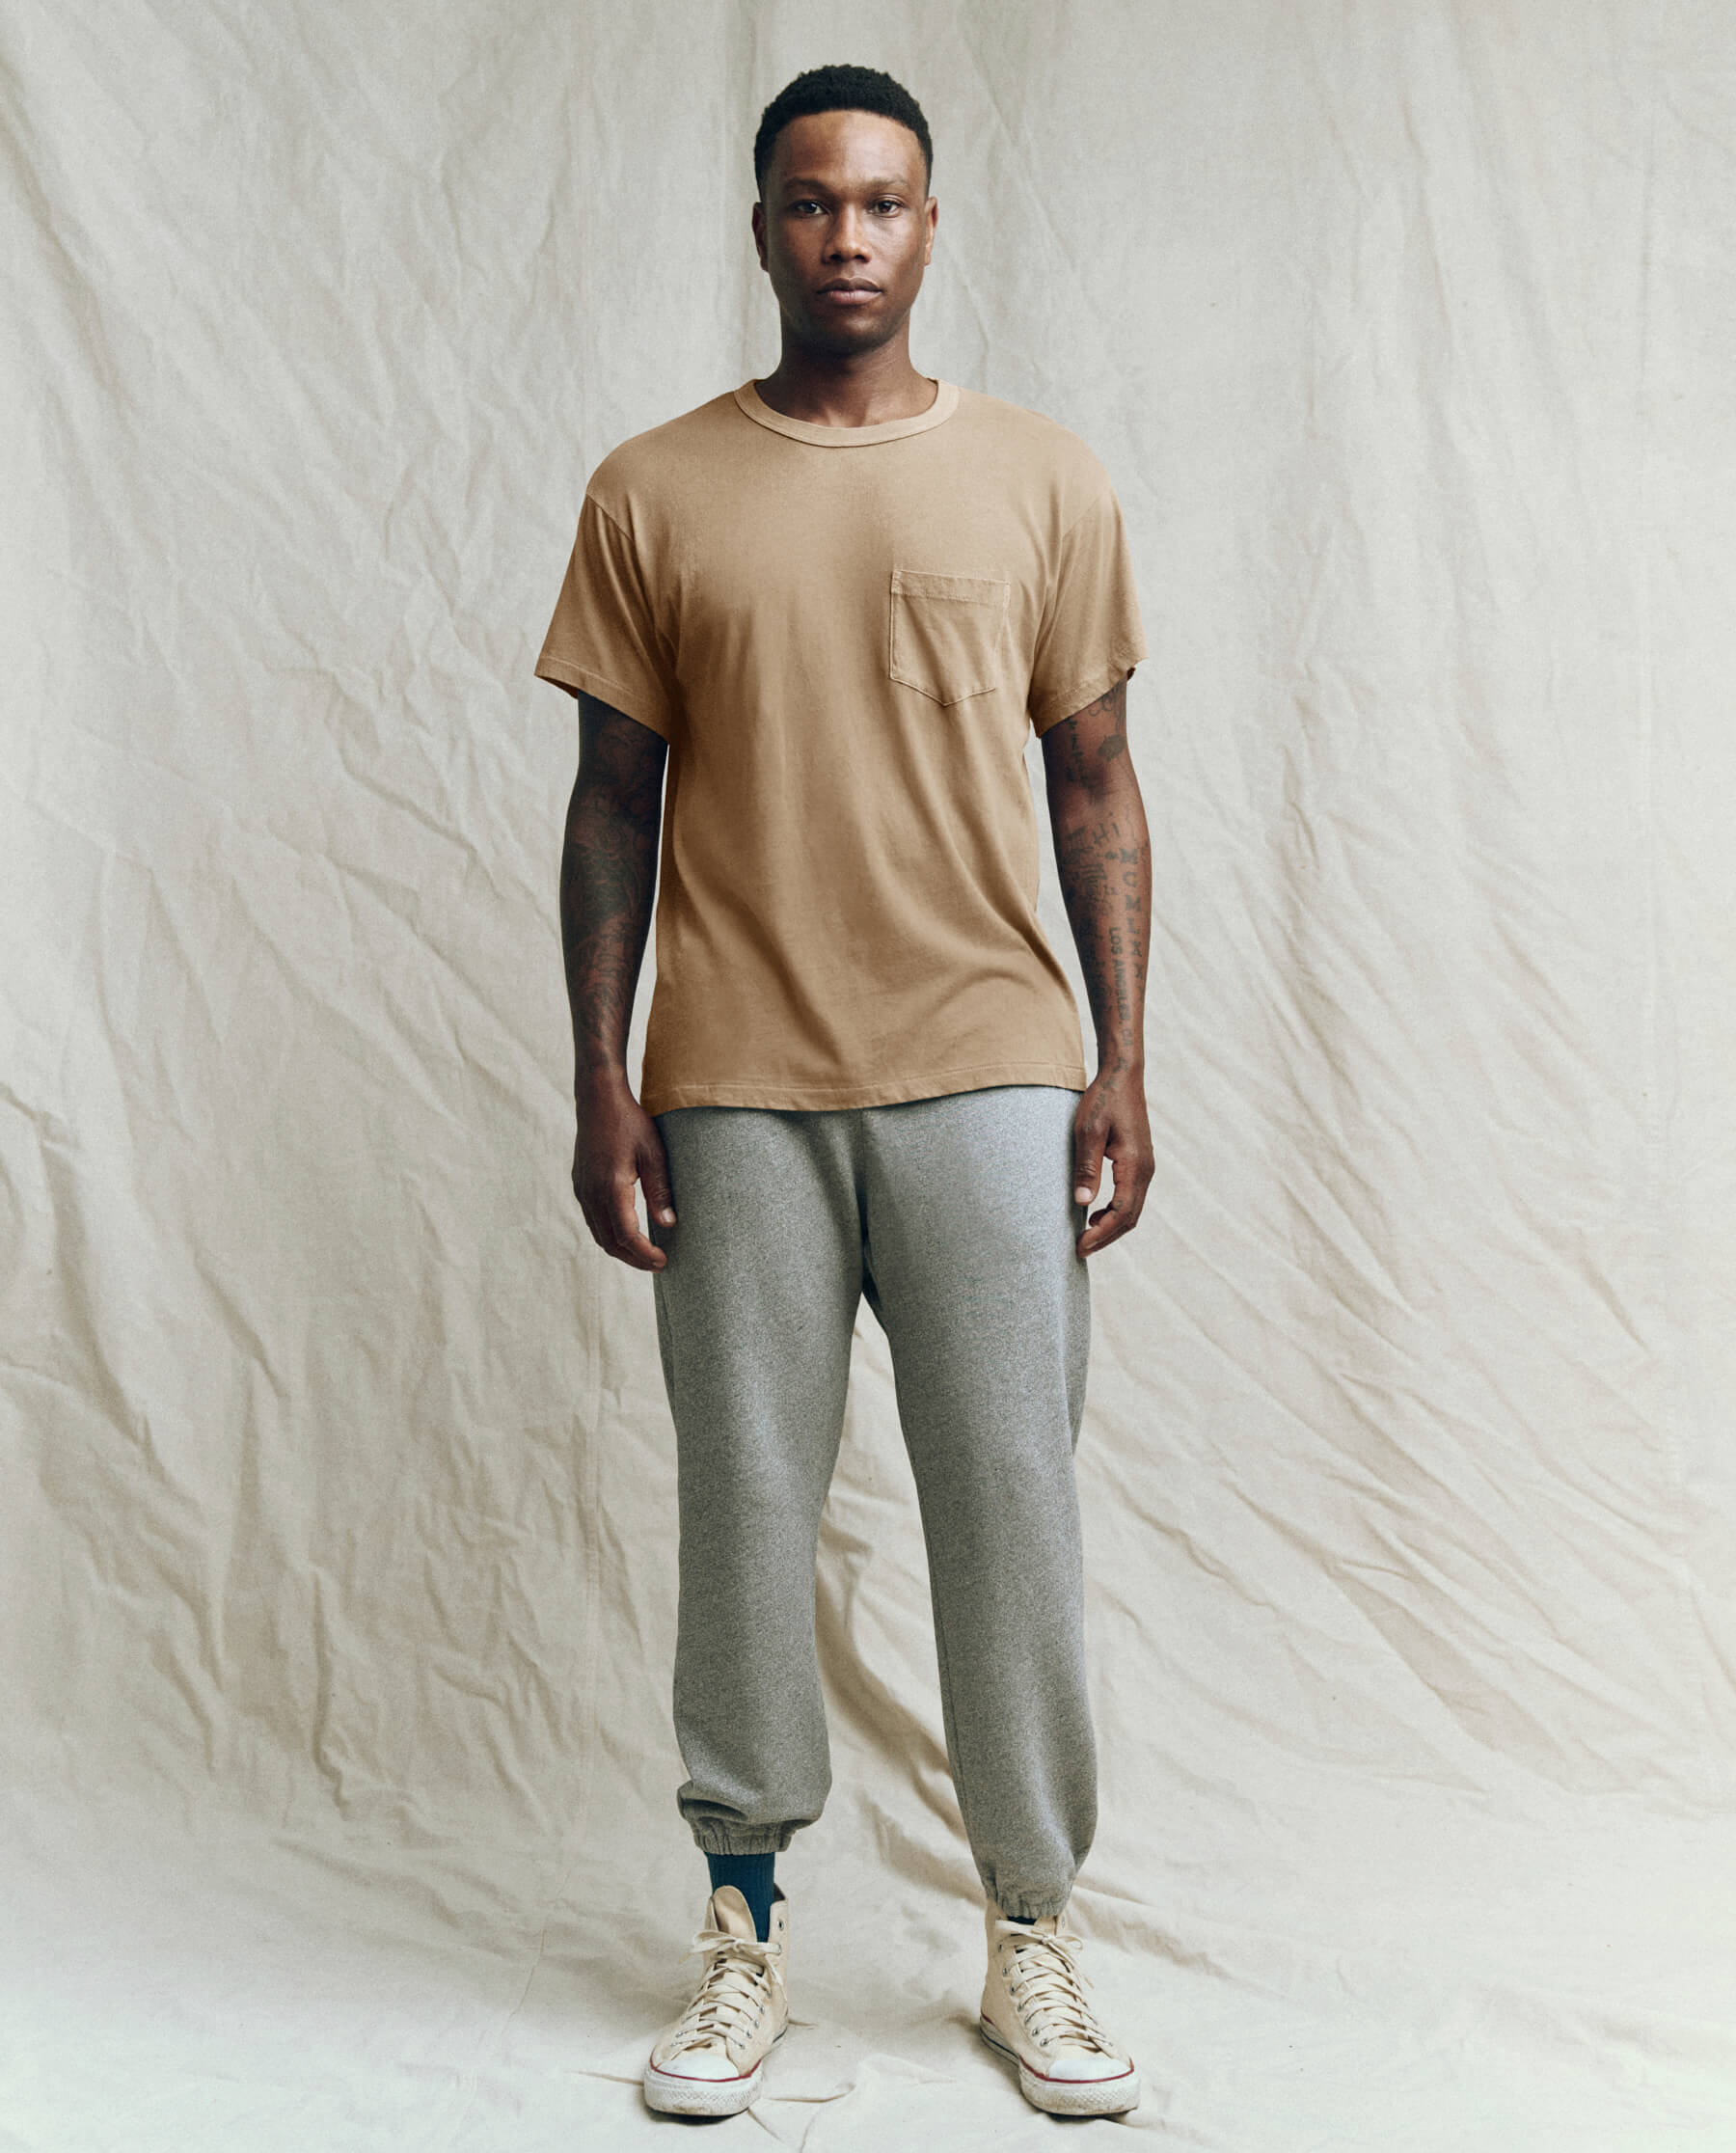 The Men's Pocket Tee. -- Fawn